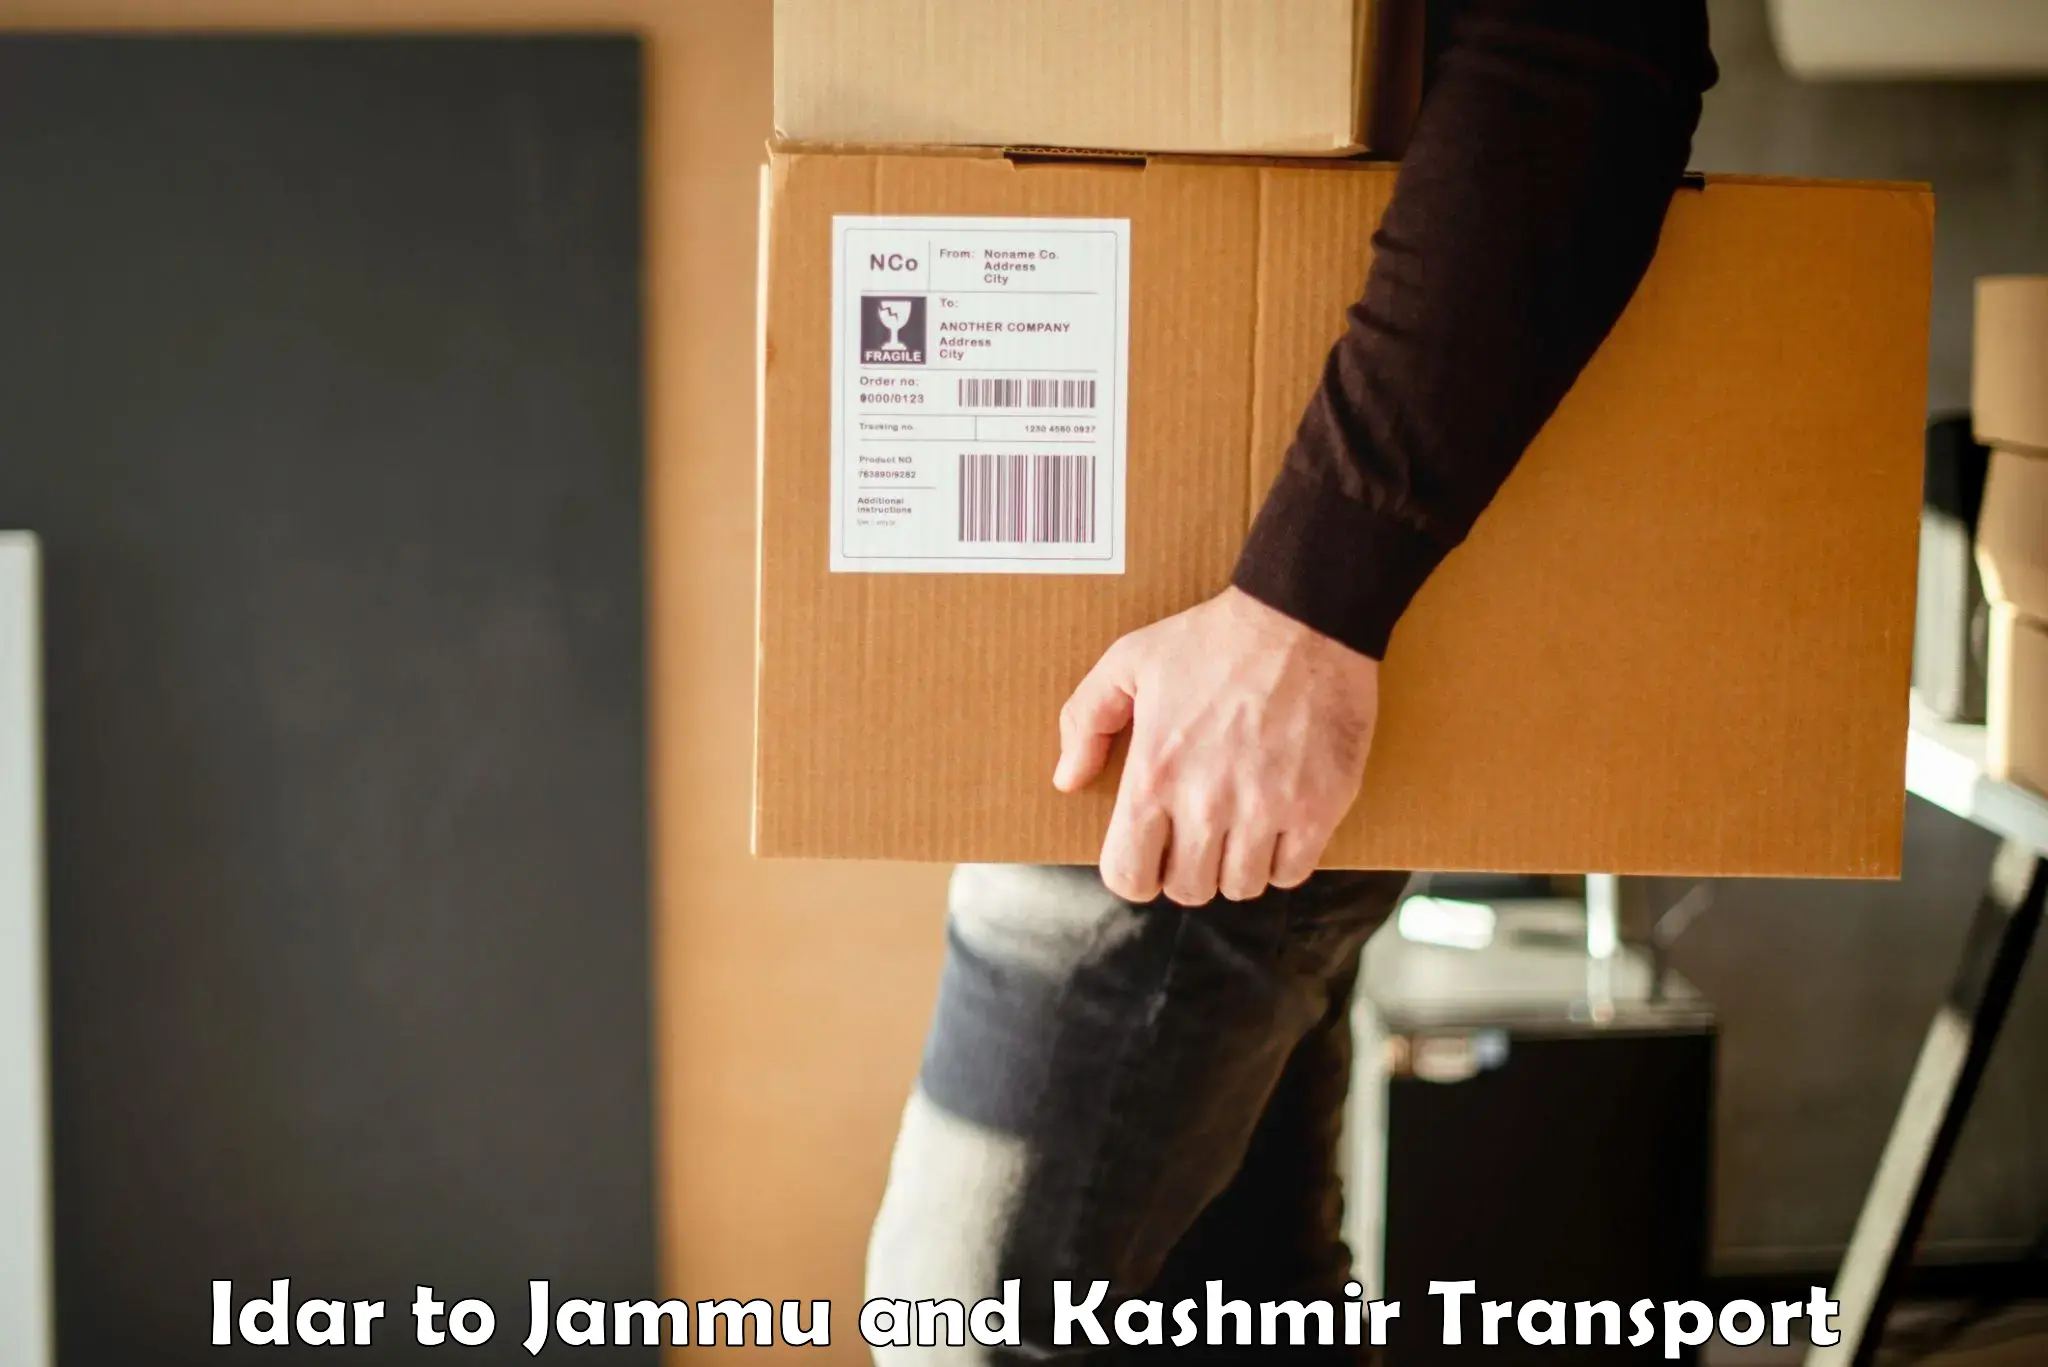 Transport bike from one state to another in Idar to Jammu and Kashmir